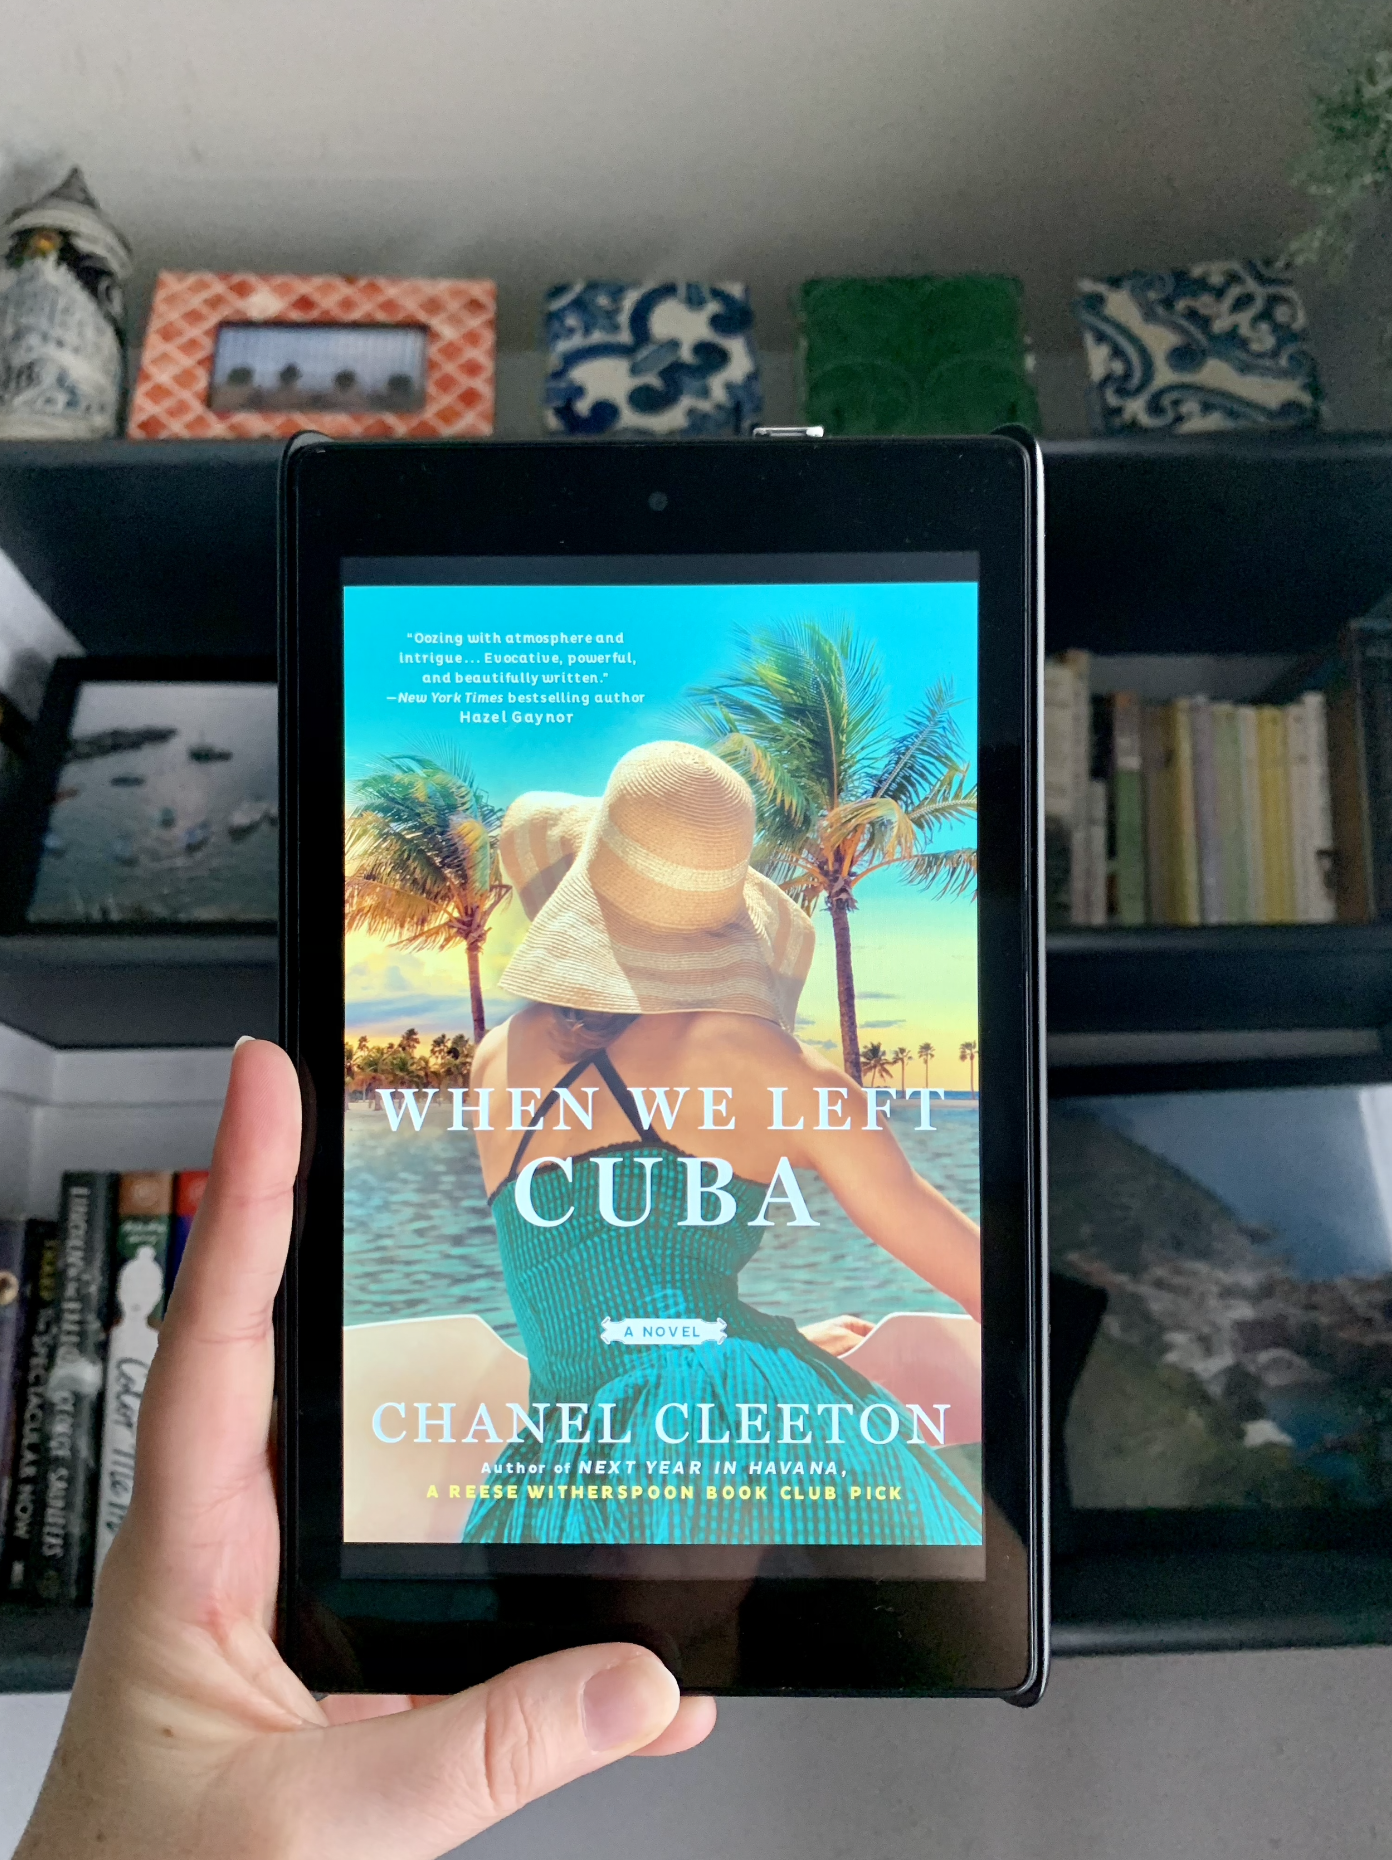 Book Review: "When We Left Cuba" by Chanel Cleeton Full of Lit